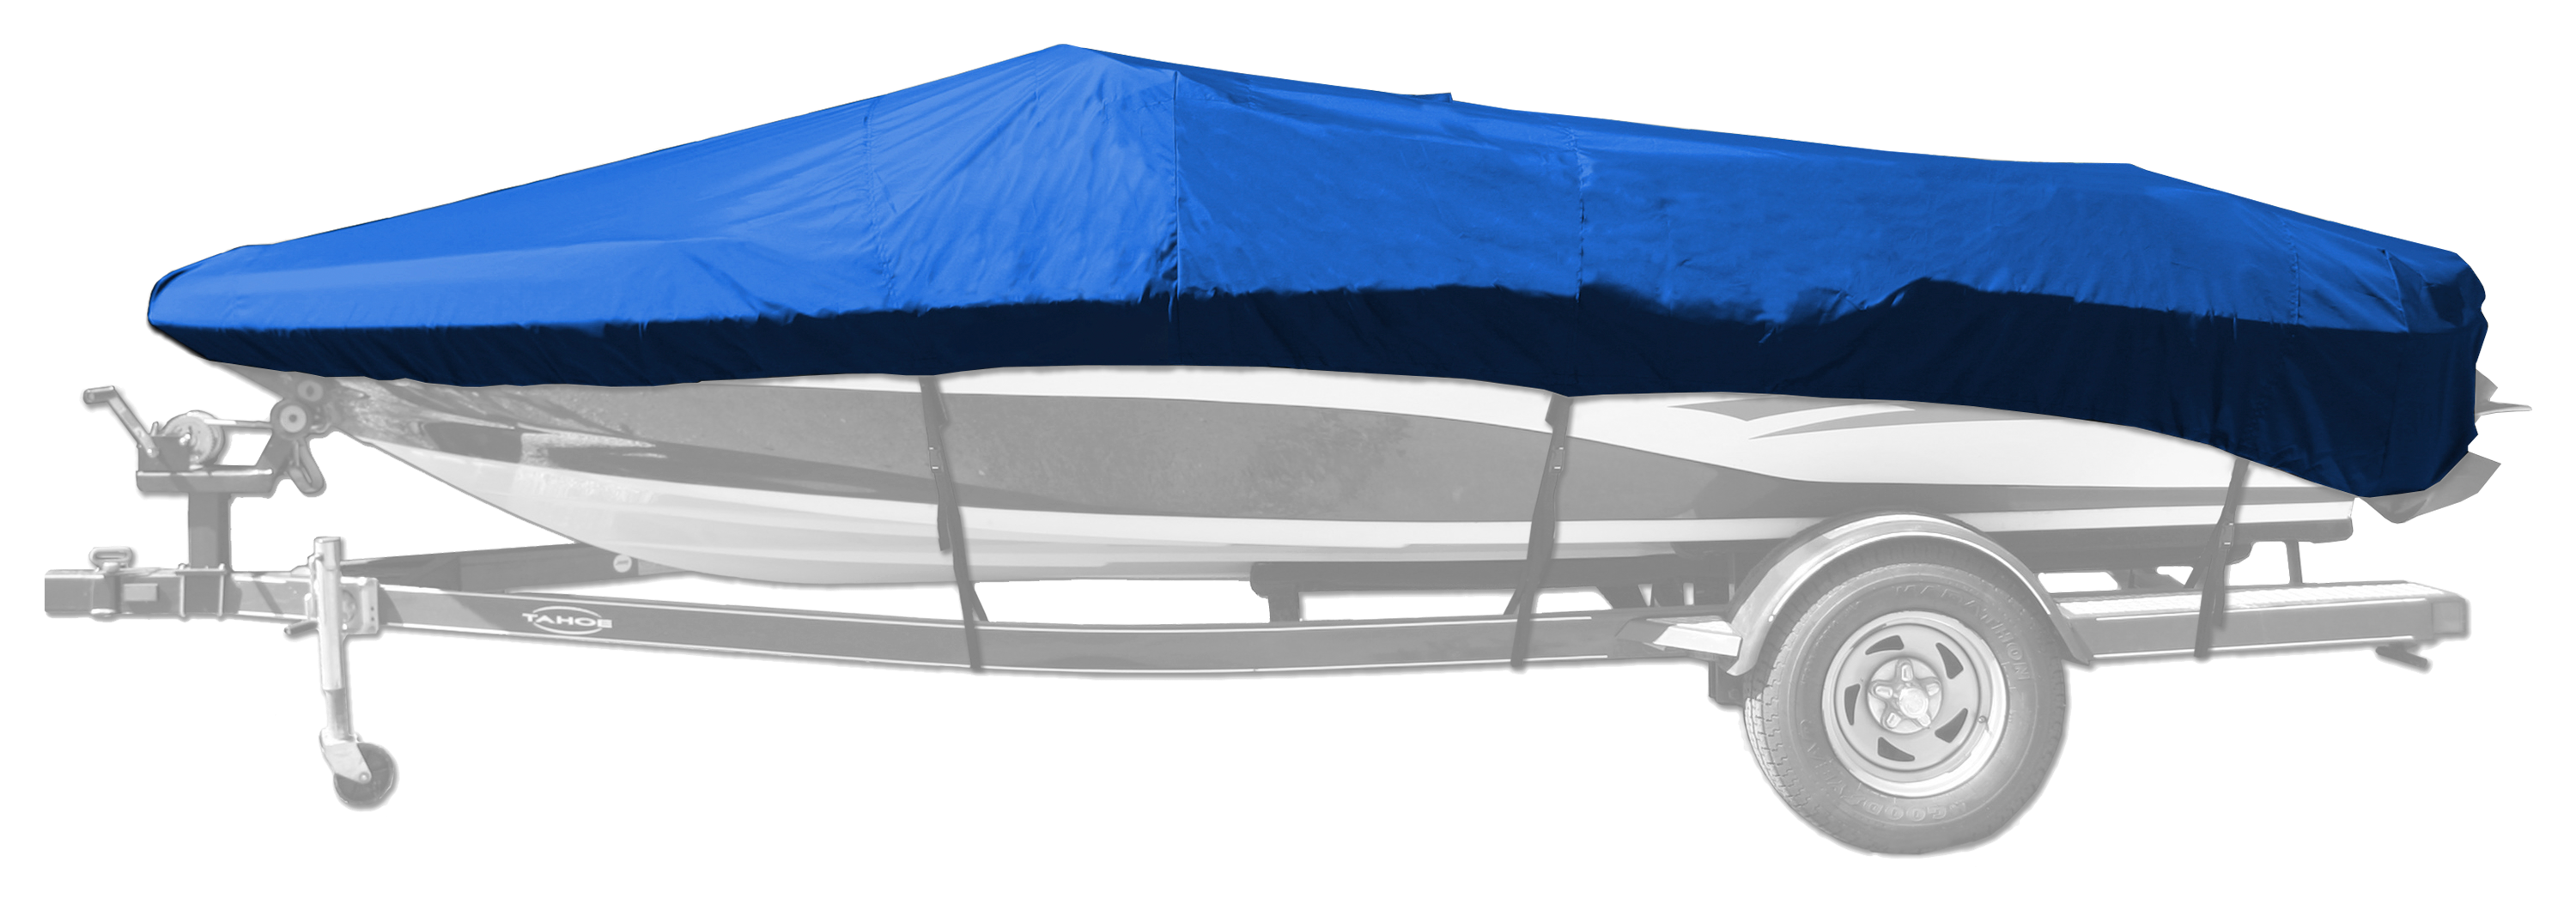 Bass Pro Shops Select Fit Hurricane Boat Cover by Westland for Euro V-Hull Runabout I/O Model - Blue - 20'6'' to 21'5